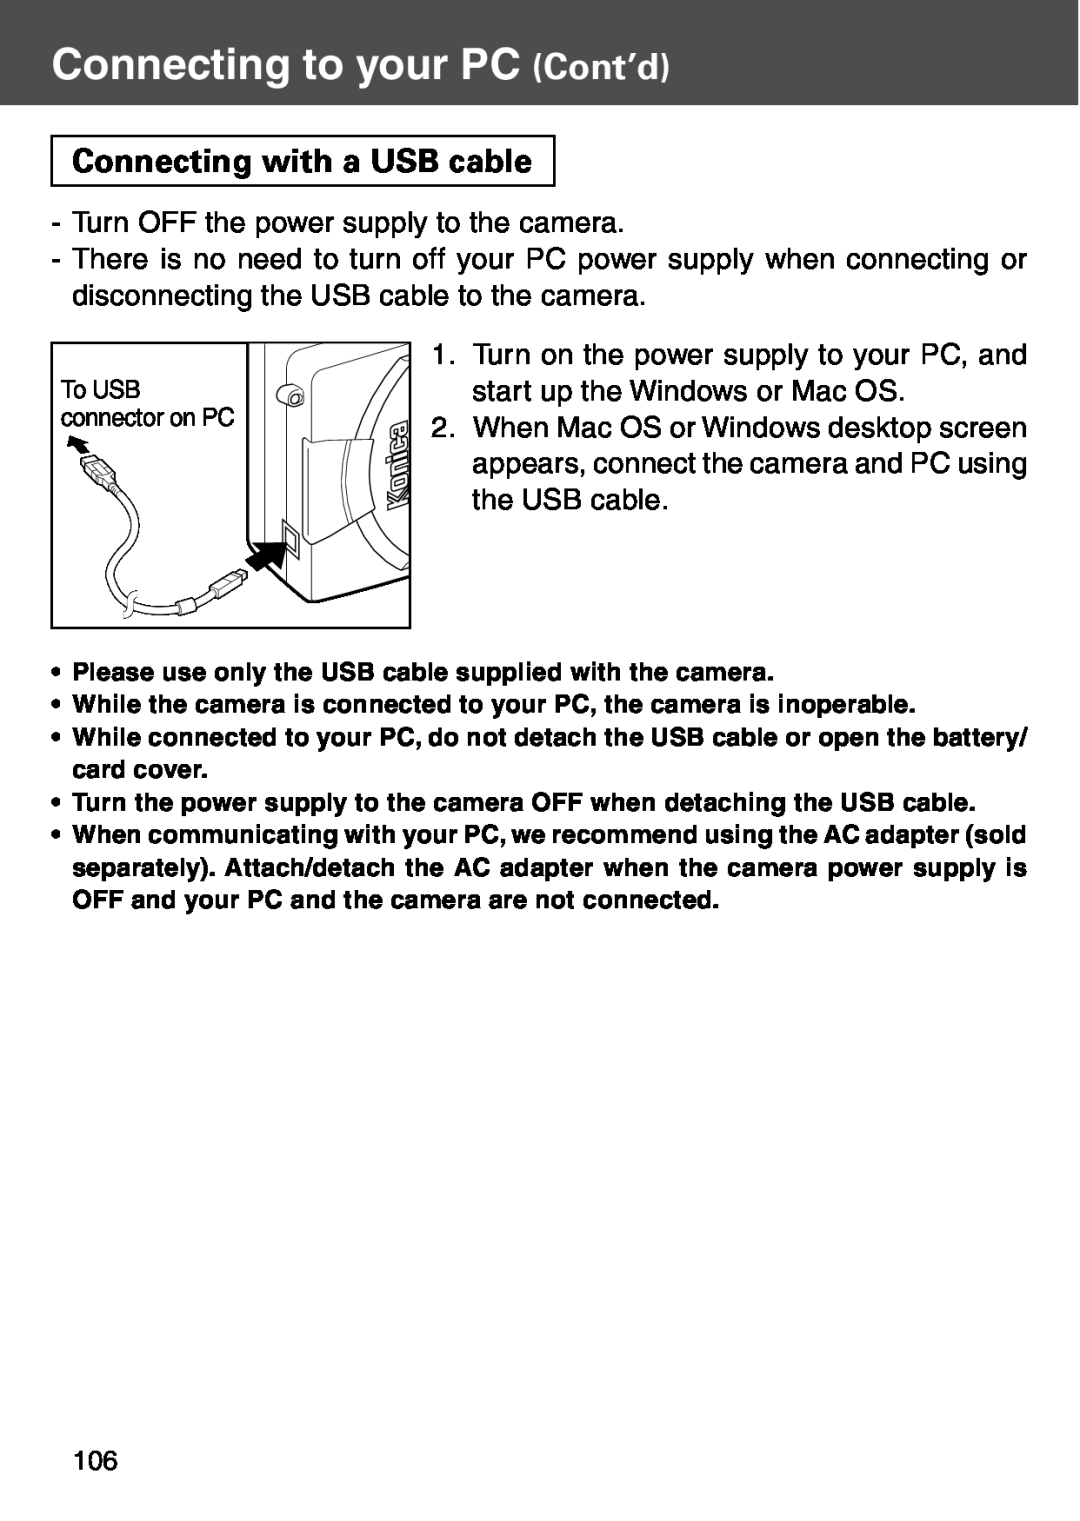 Konica Minolta KD-500Z user manual Connecting to your PC Cont’d, Connecting with a USB cable 